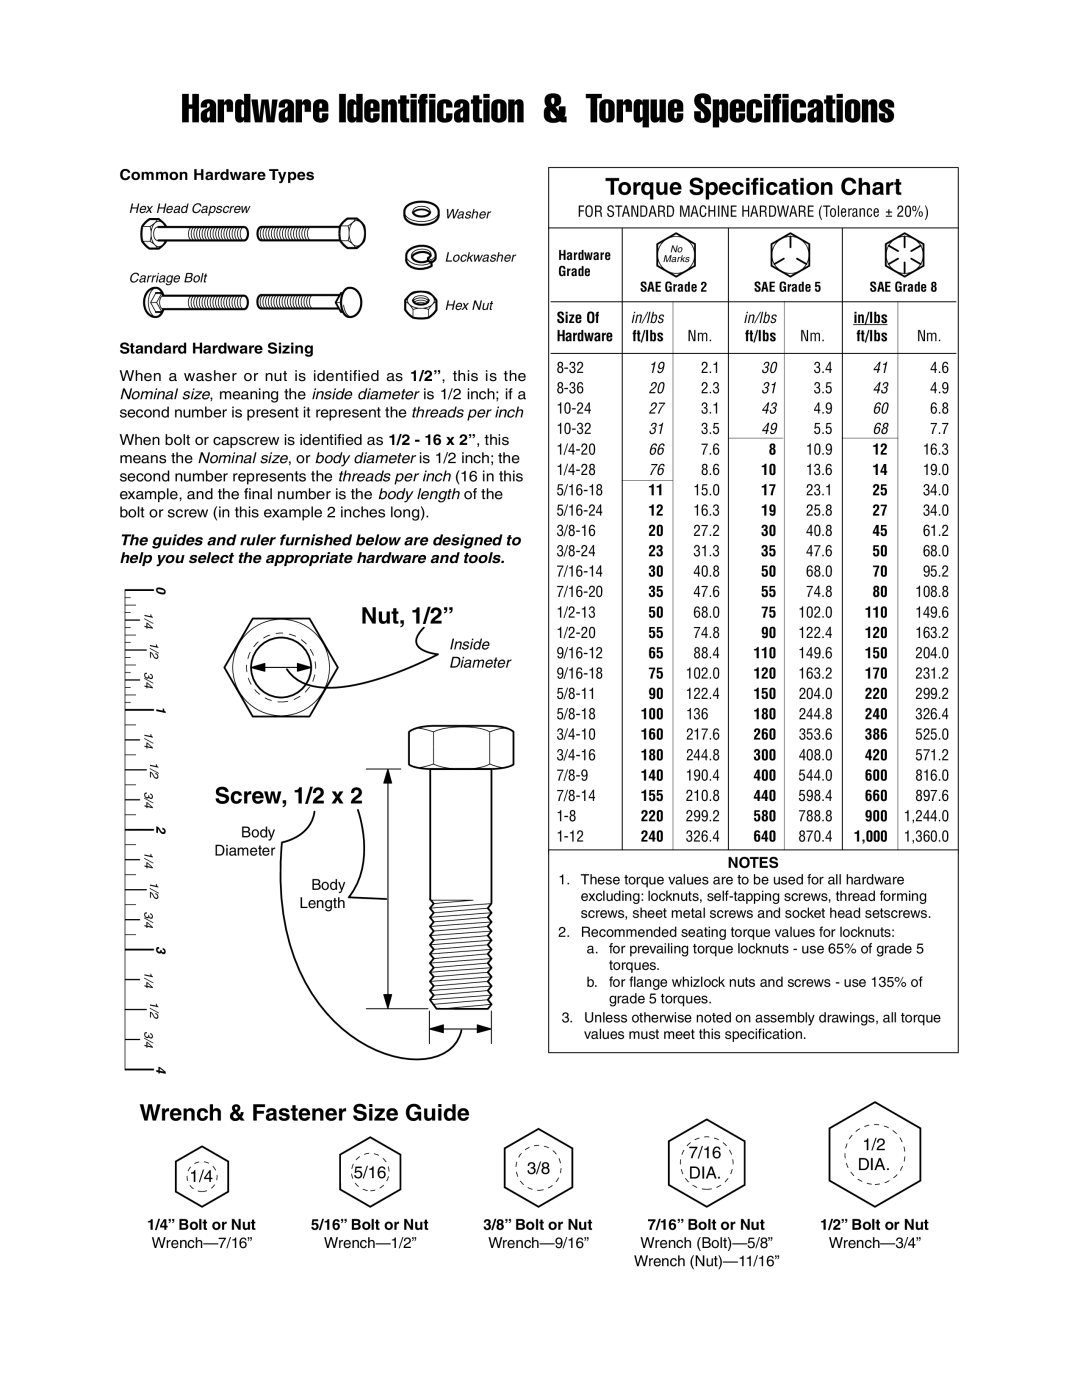 Simplicity 1694919 Wrench & Fastener Size Guide, Hardware Identification & Torque Specifications, Nut, 1/2”, Screw, 1/2 